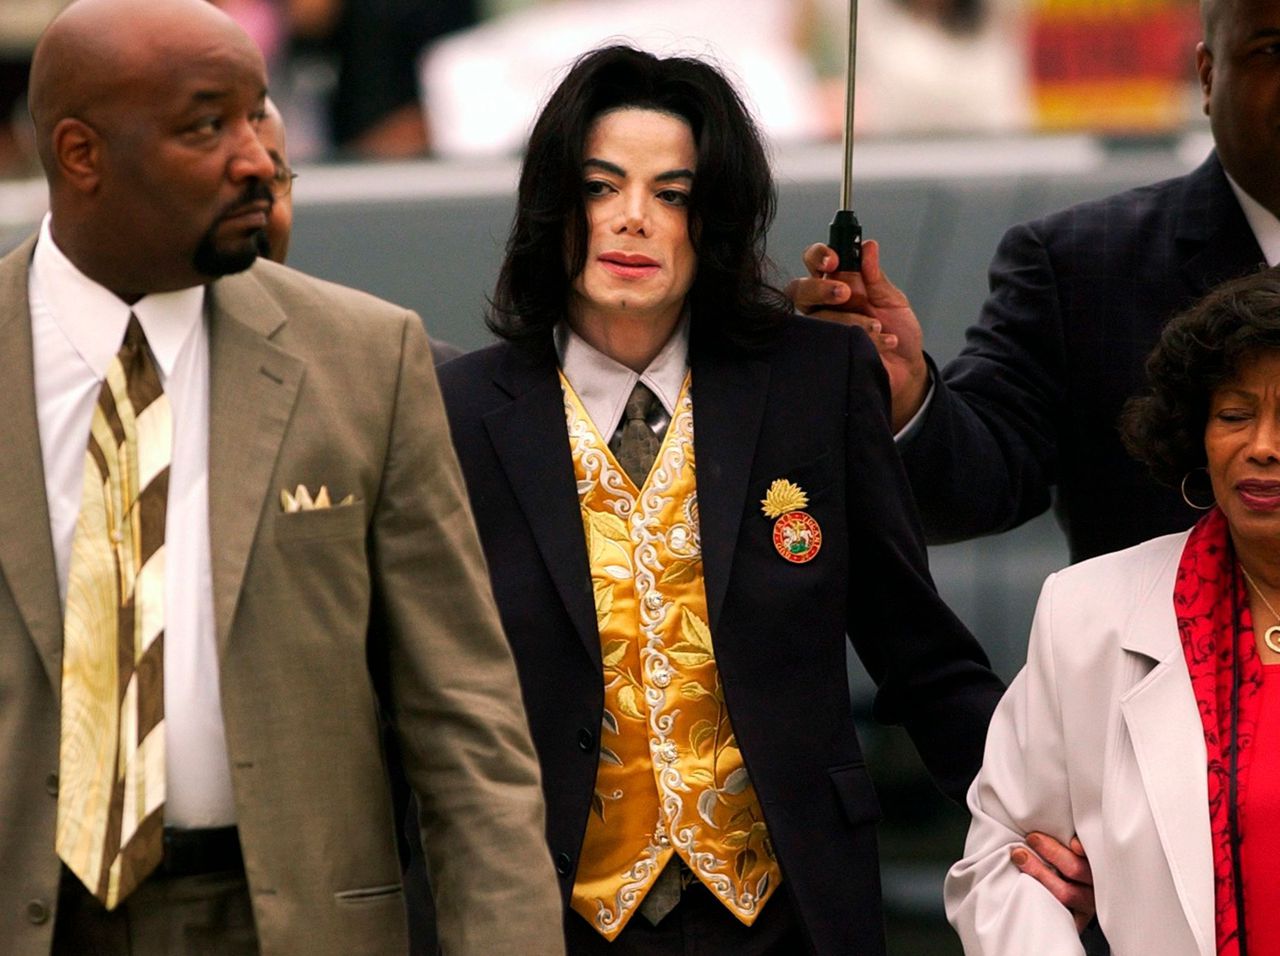 Micheal Jackson's family still denies all claims of abuse, image via Shutterstock